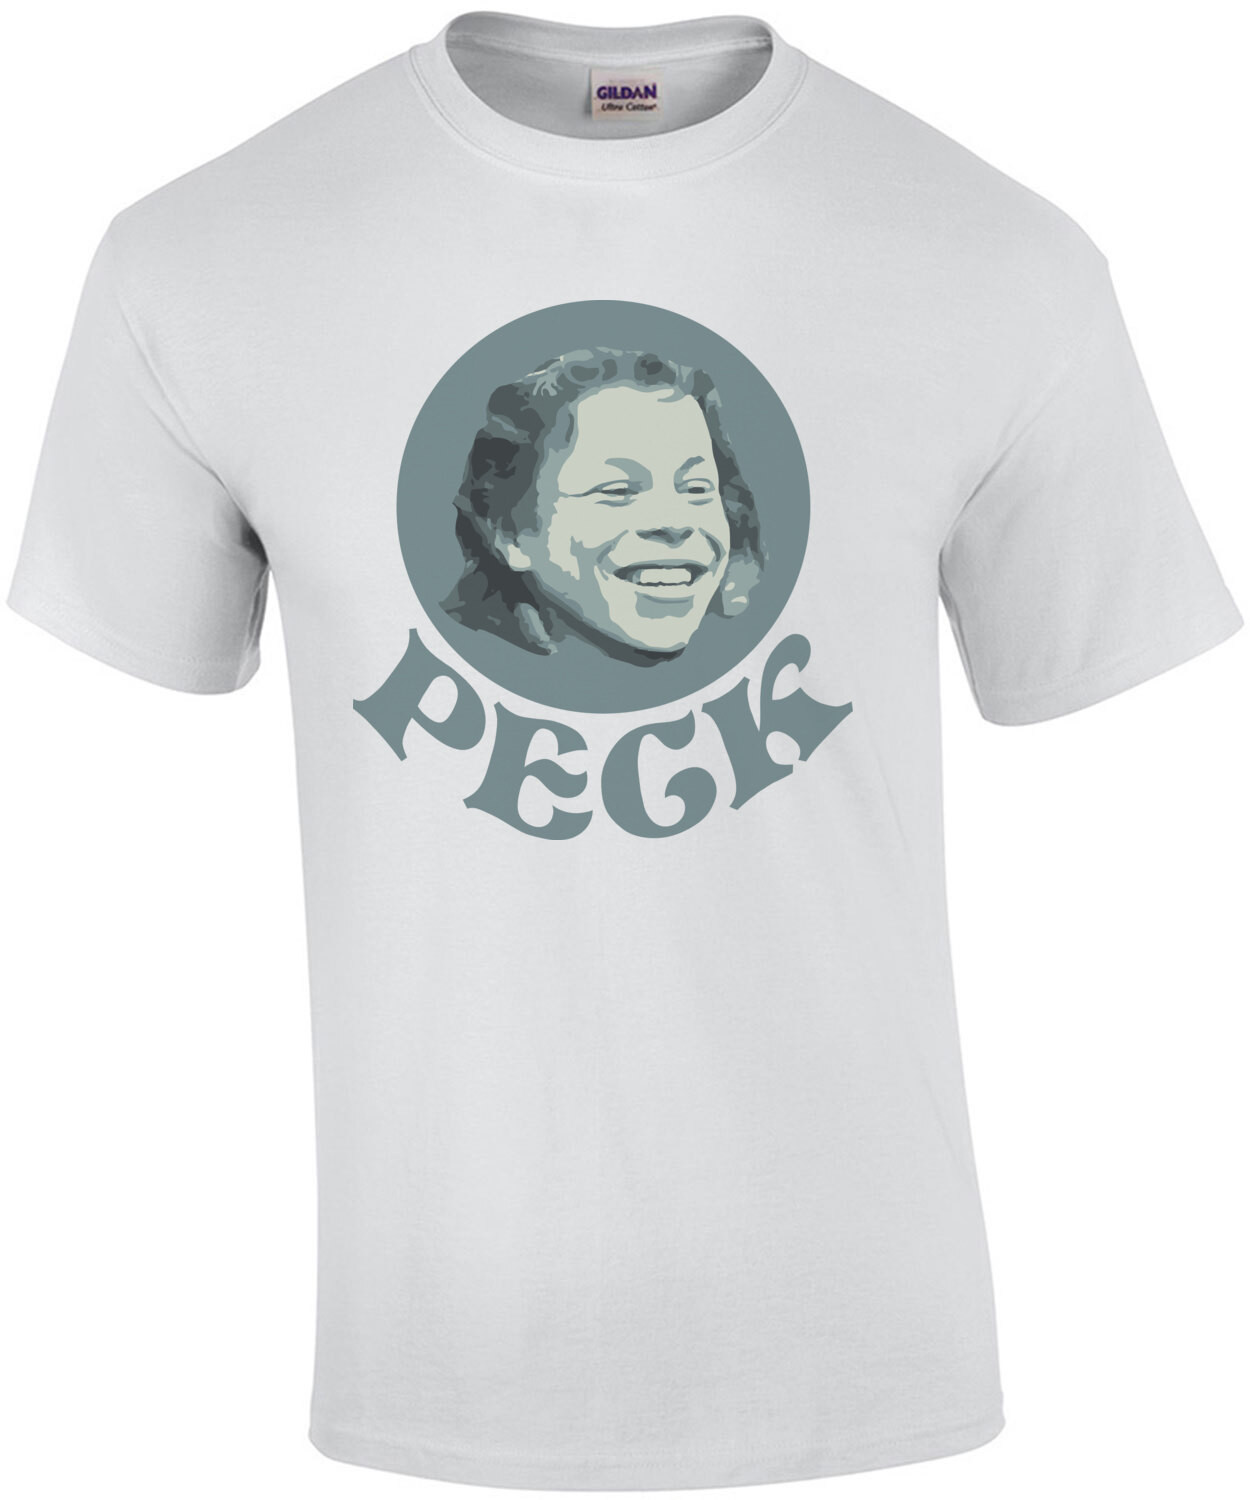 PECK - Willow - 80's T-Shirt